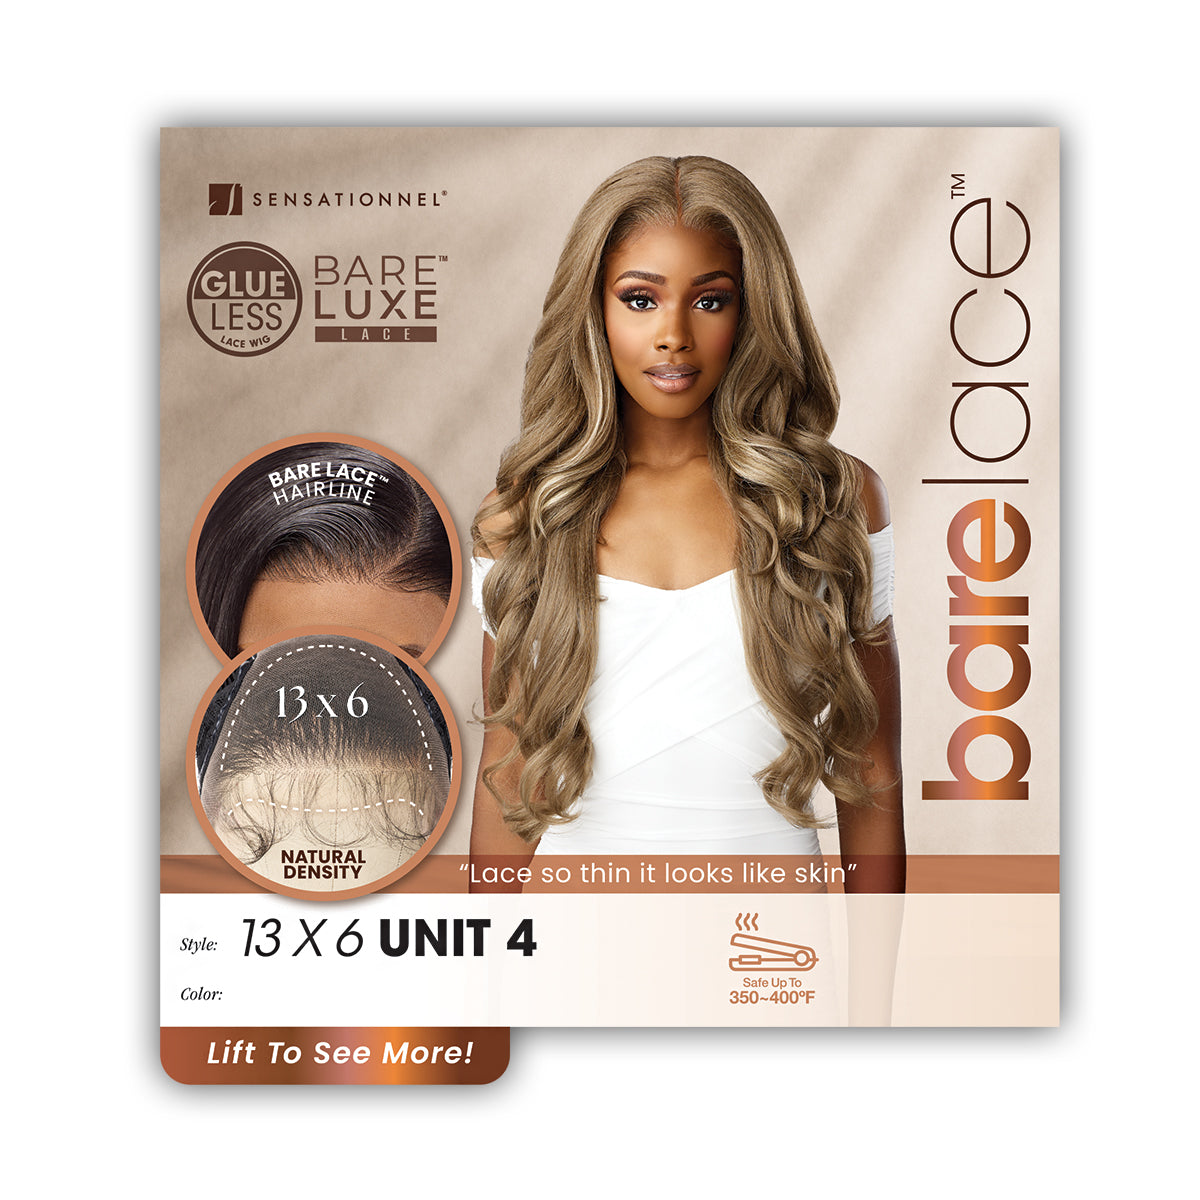 Sensationnel Barelace Synthetic Hair 13x6 Glueless BARELUXE Lace Wig - 13X6 UNIT 4